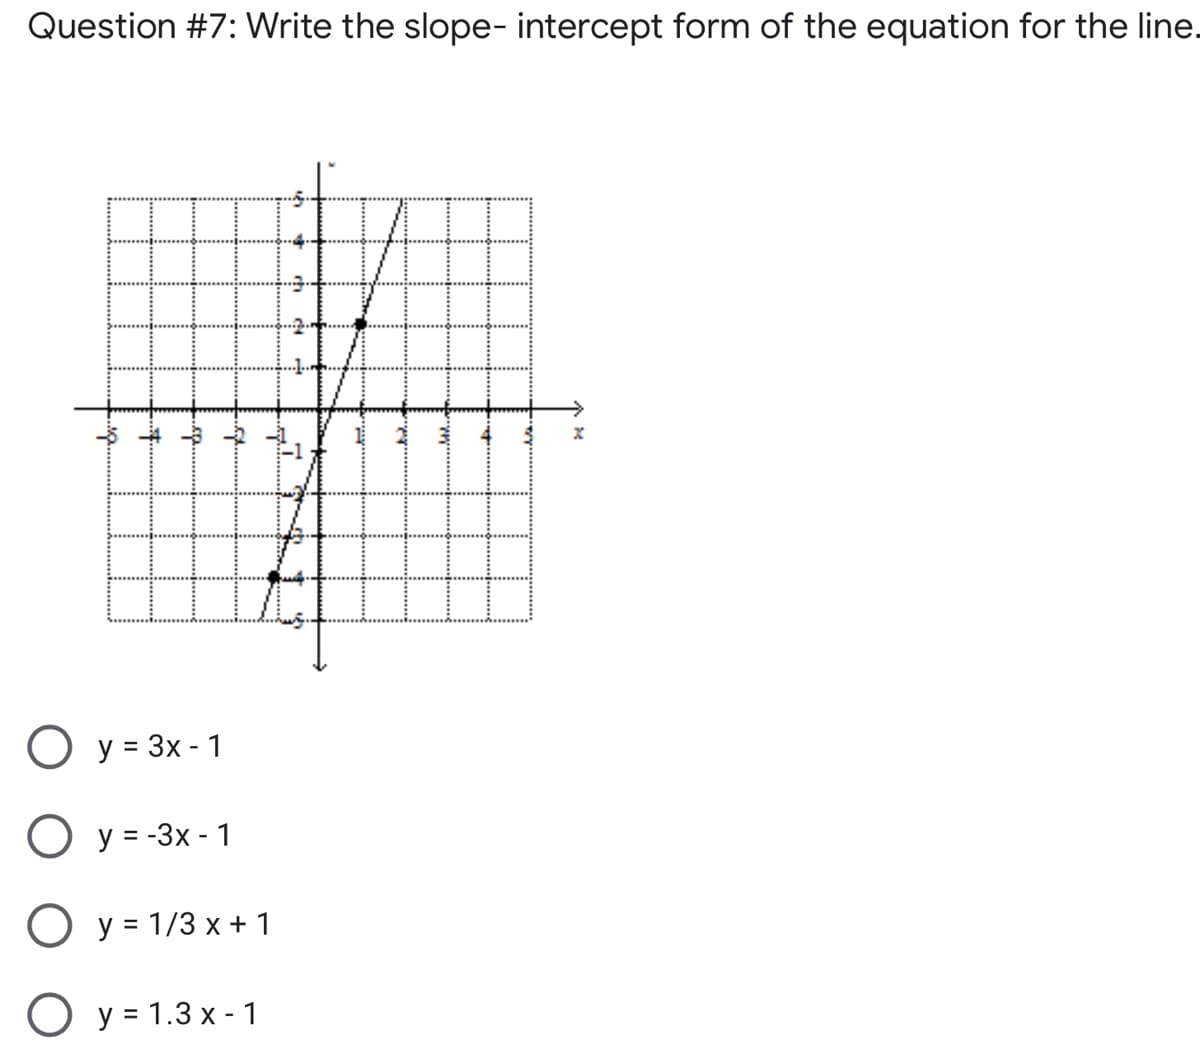 Question #7: Write the slope- intercept form of the equation for the line.
O y = 3x - 1
O y = -3x - 1
O y = 1/3 x + 1
O y = 1.3 x - 1
